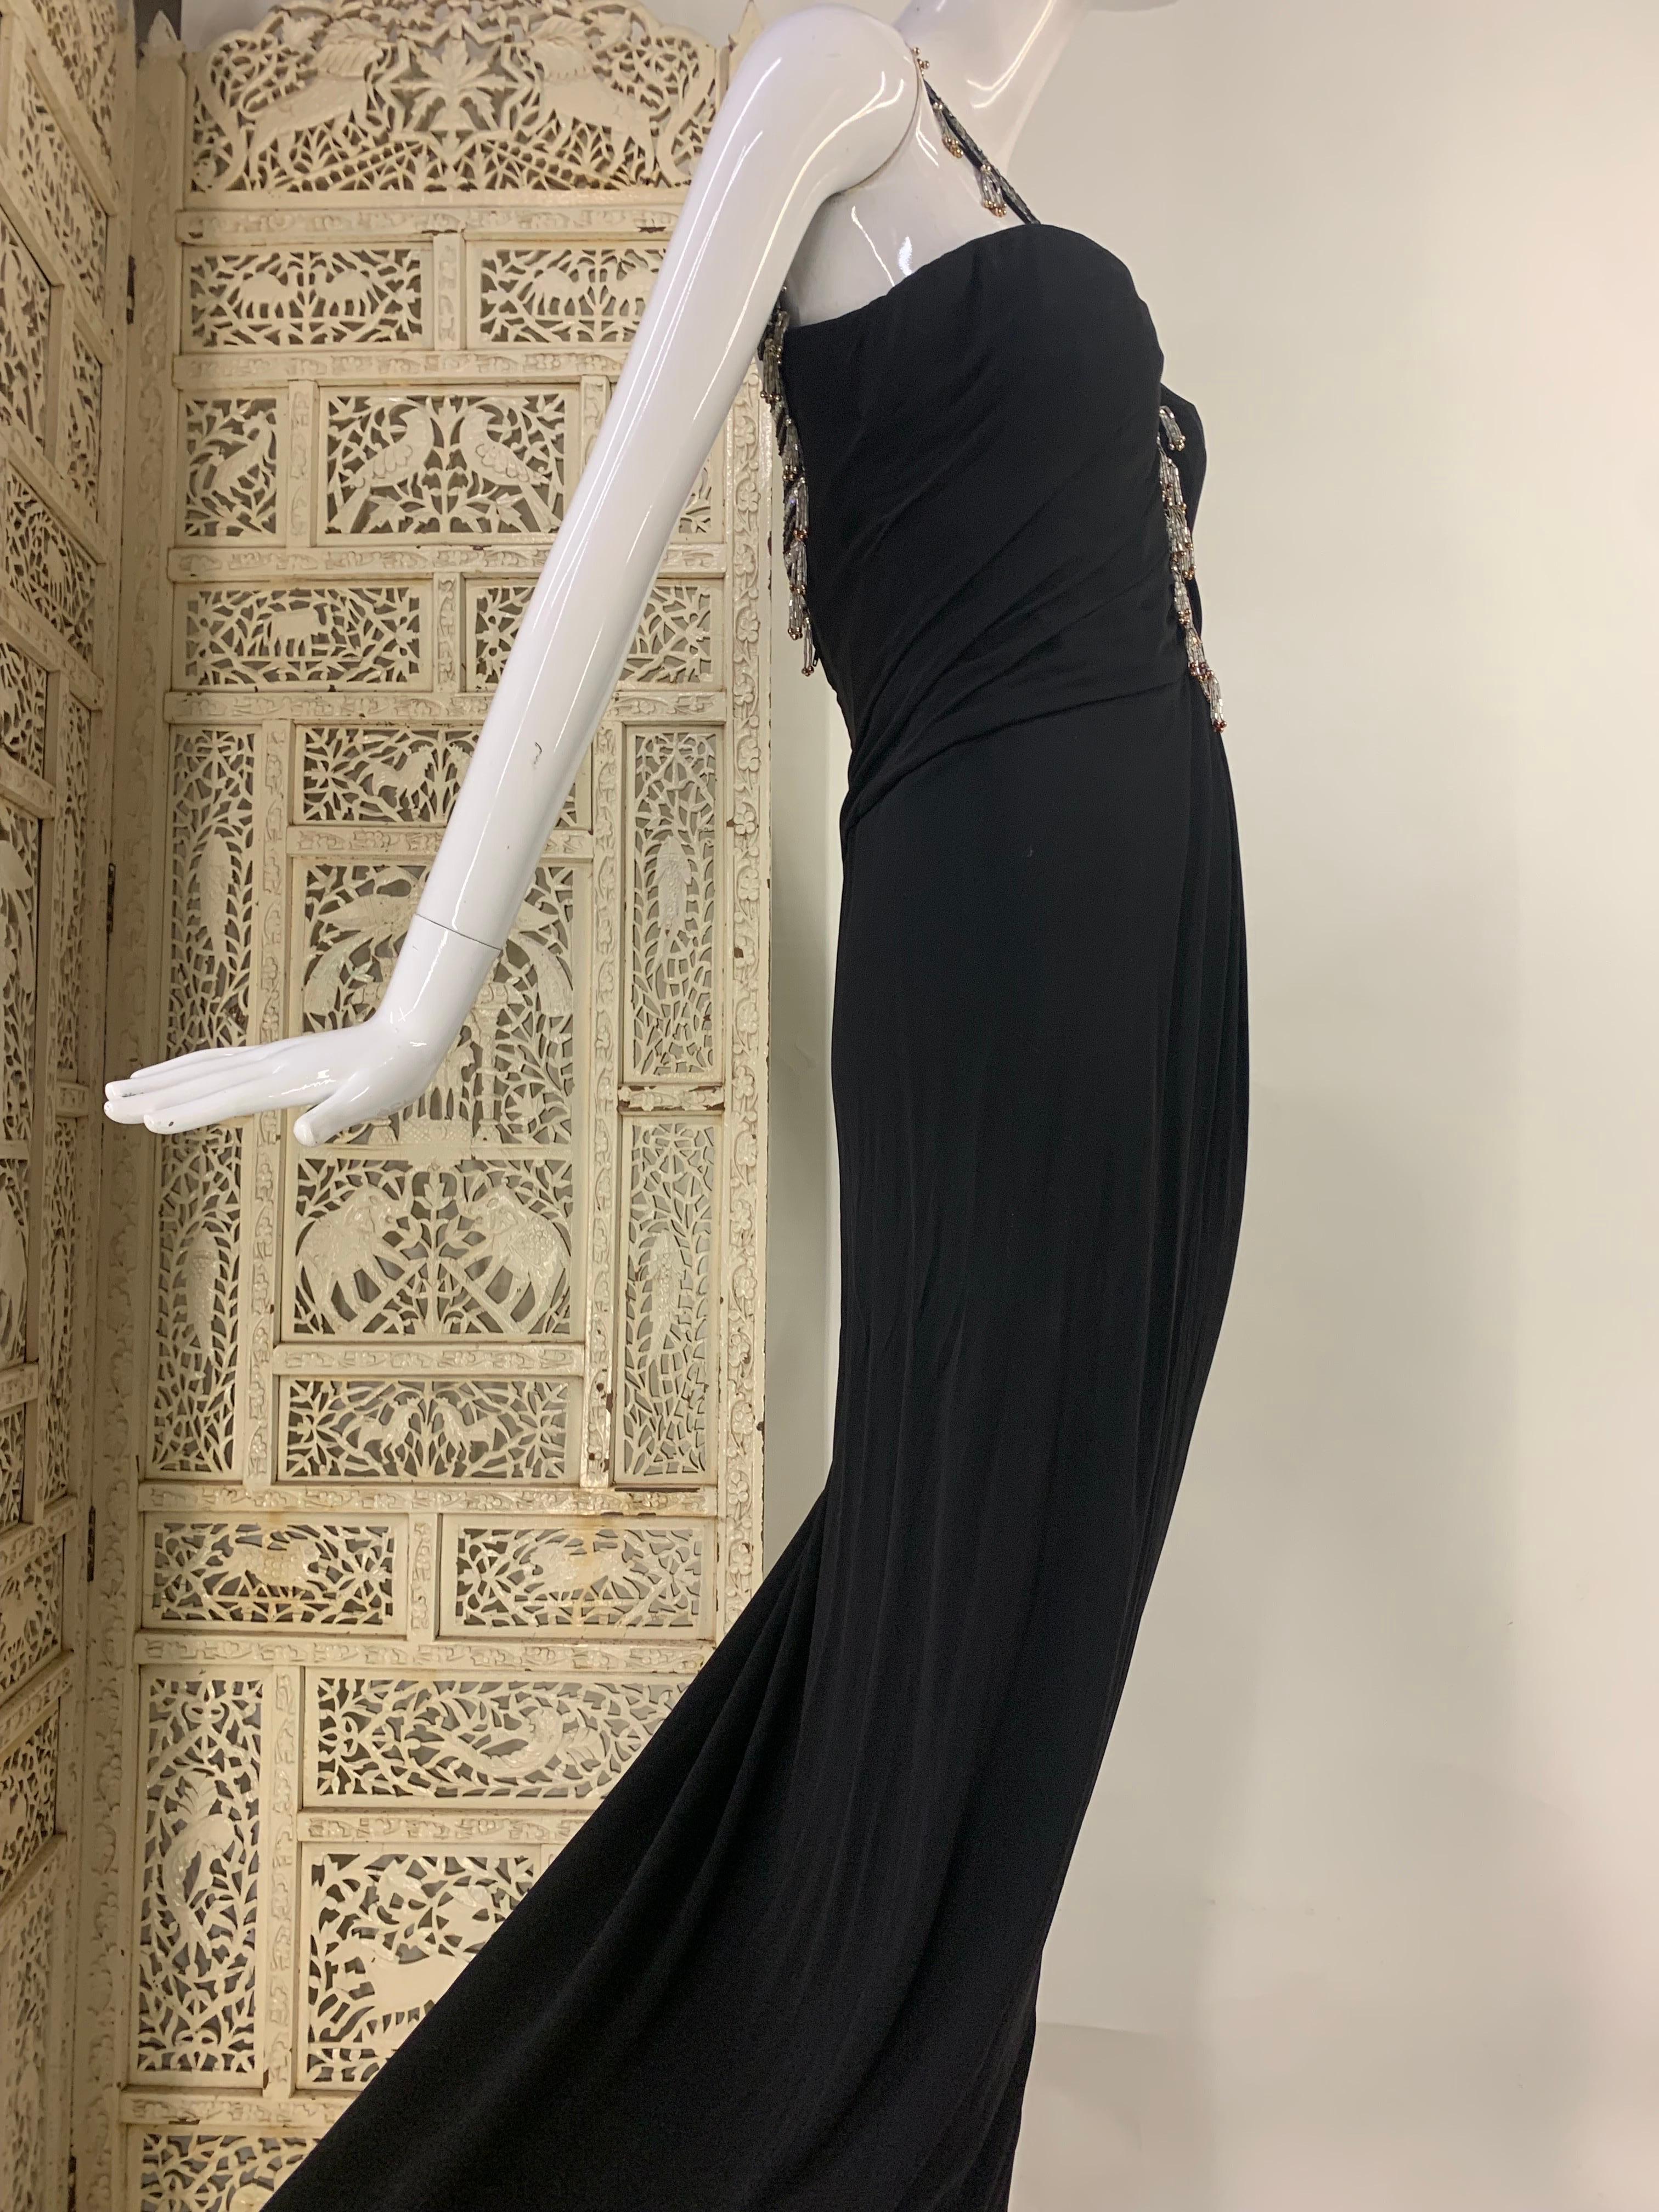 1980s Bob Mackie Black Jersey Gown w Structured Corset & Beaded Straps:  This jeweled tassel adorned plunging deep V neckline and low scooped back, make a daring evening gown in a vampy black matte jersey--ruched and draped on a structured corset